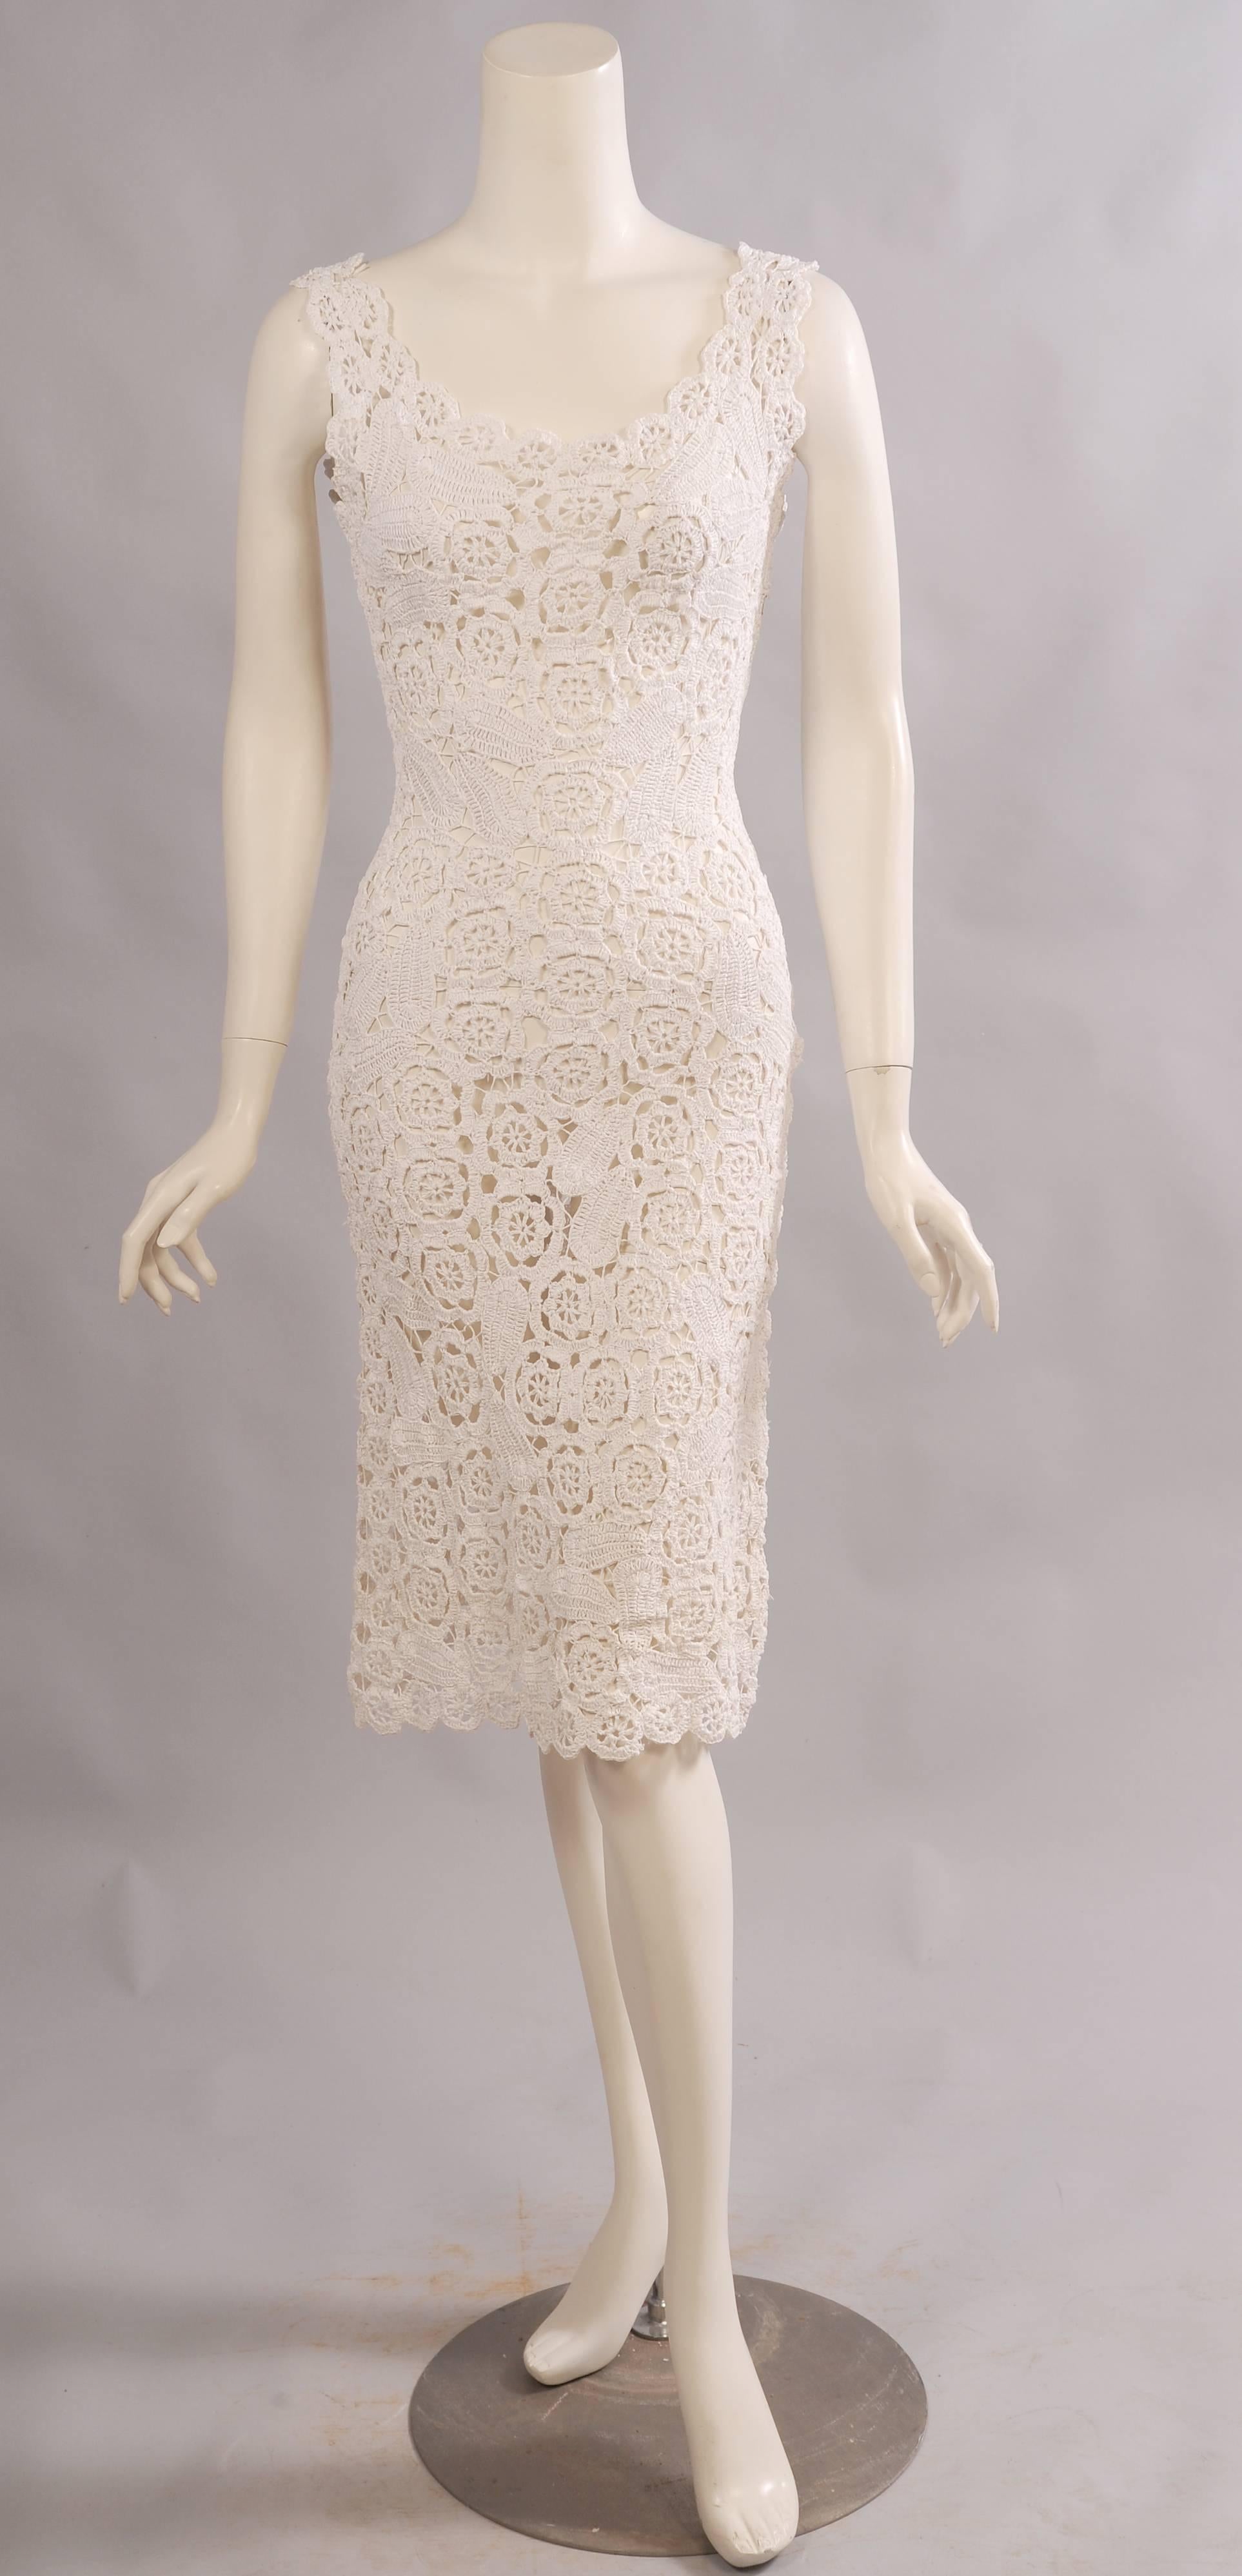 Beautifully hand made from white raffia this 1960's sleeveless sheath has a low neckline edged with white raffia roundels. The dress is fitted through the torso with a left side metal zipper. The hem is scalloped with matching roundels. This lovely